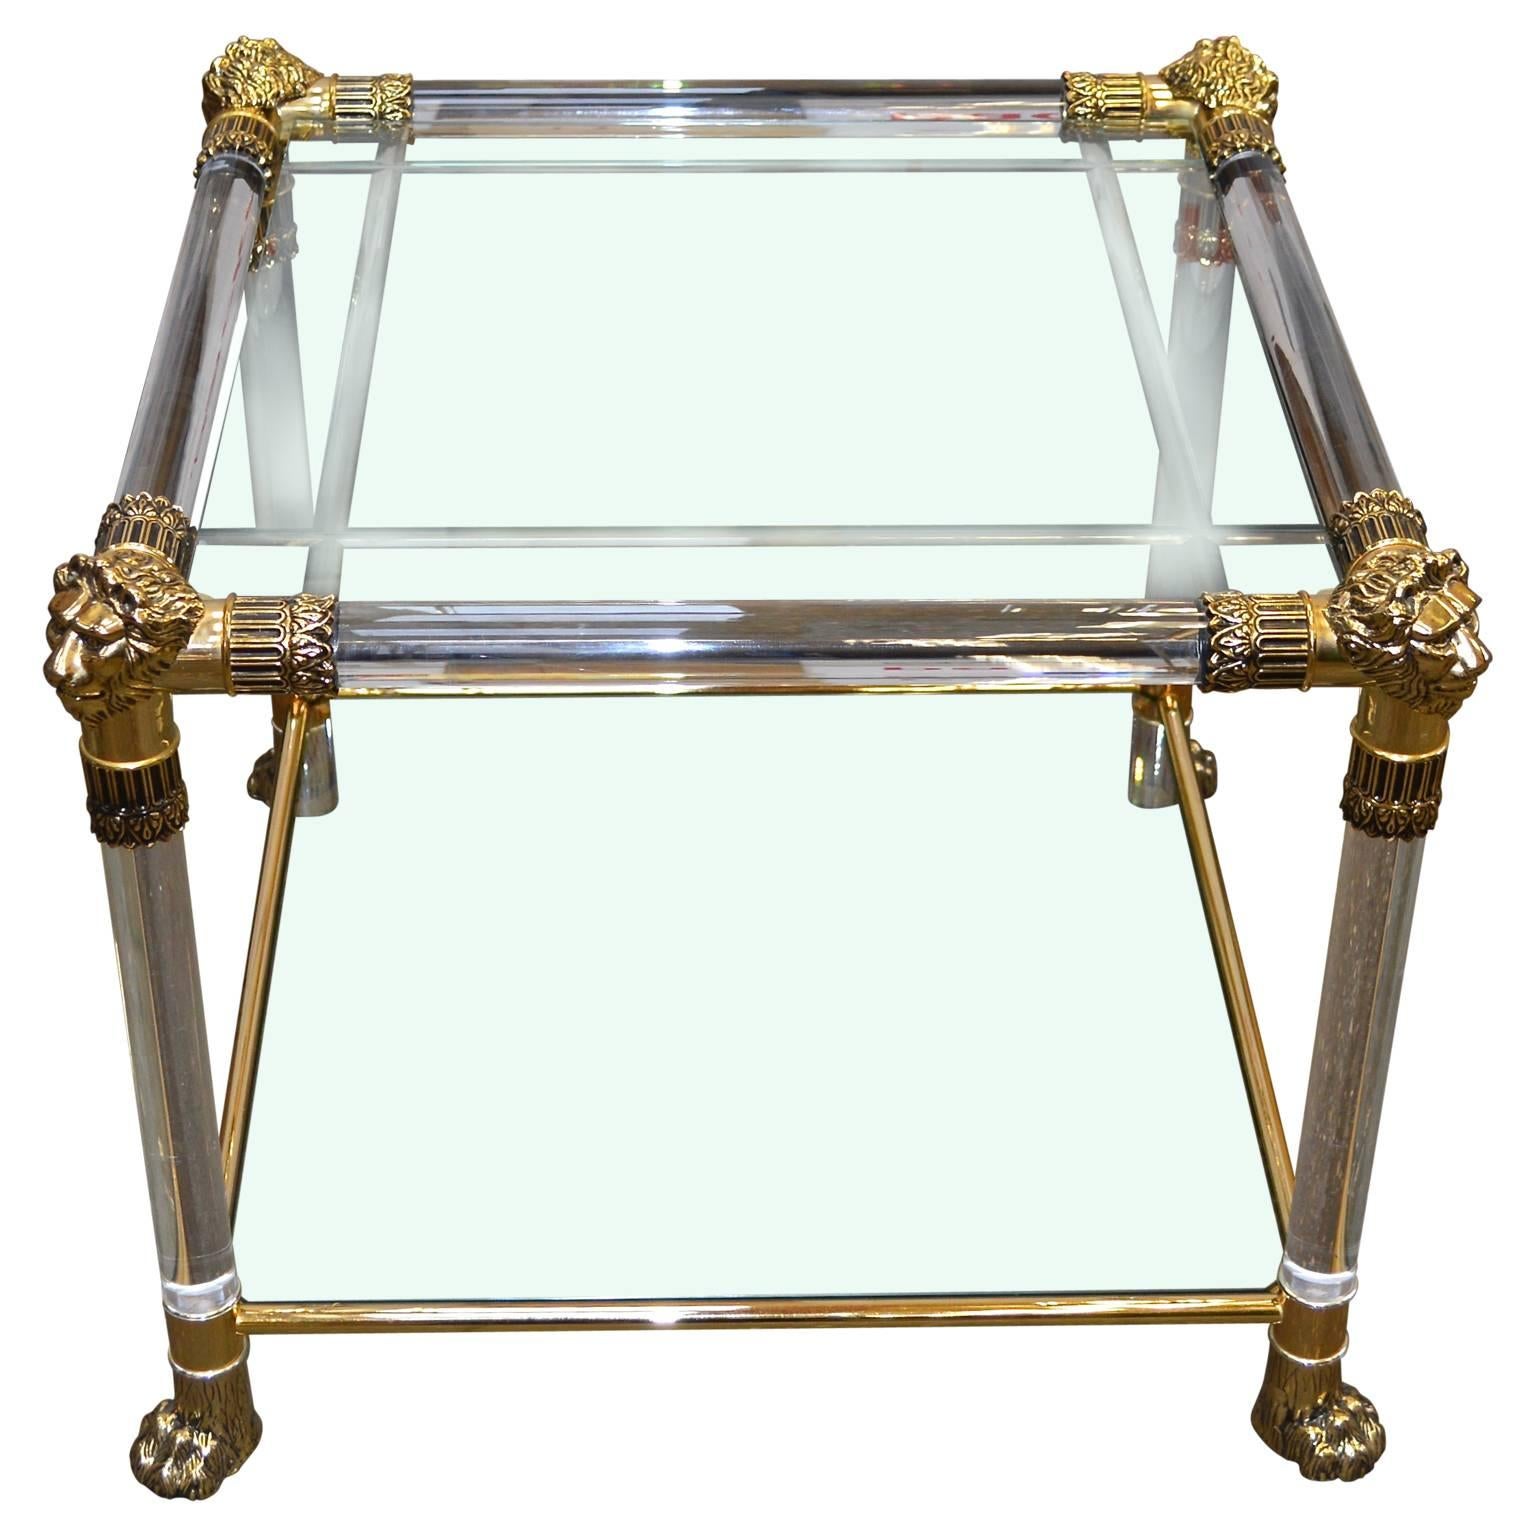 Versace Lucite and glasstop side table with lion heads and feet of brass
The top glass piece has 4 circa 1 cm wide pound sign-shaped engraved lines. Lower glass piece for magazines has no decorations.